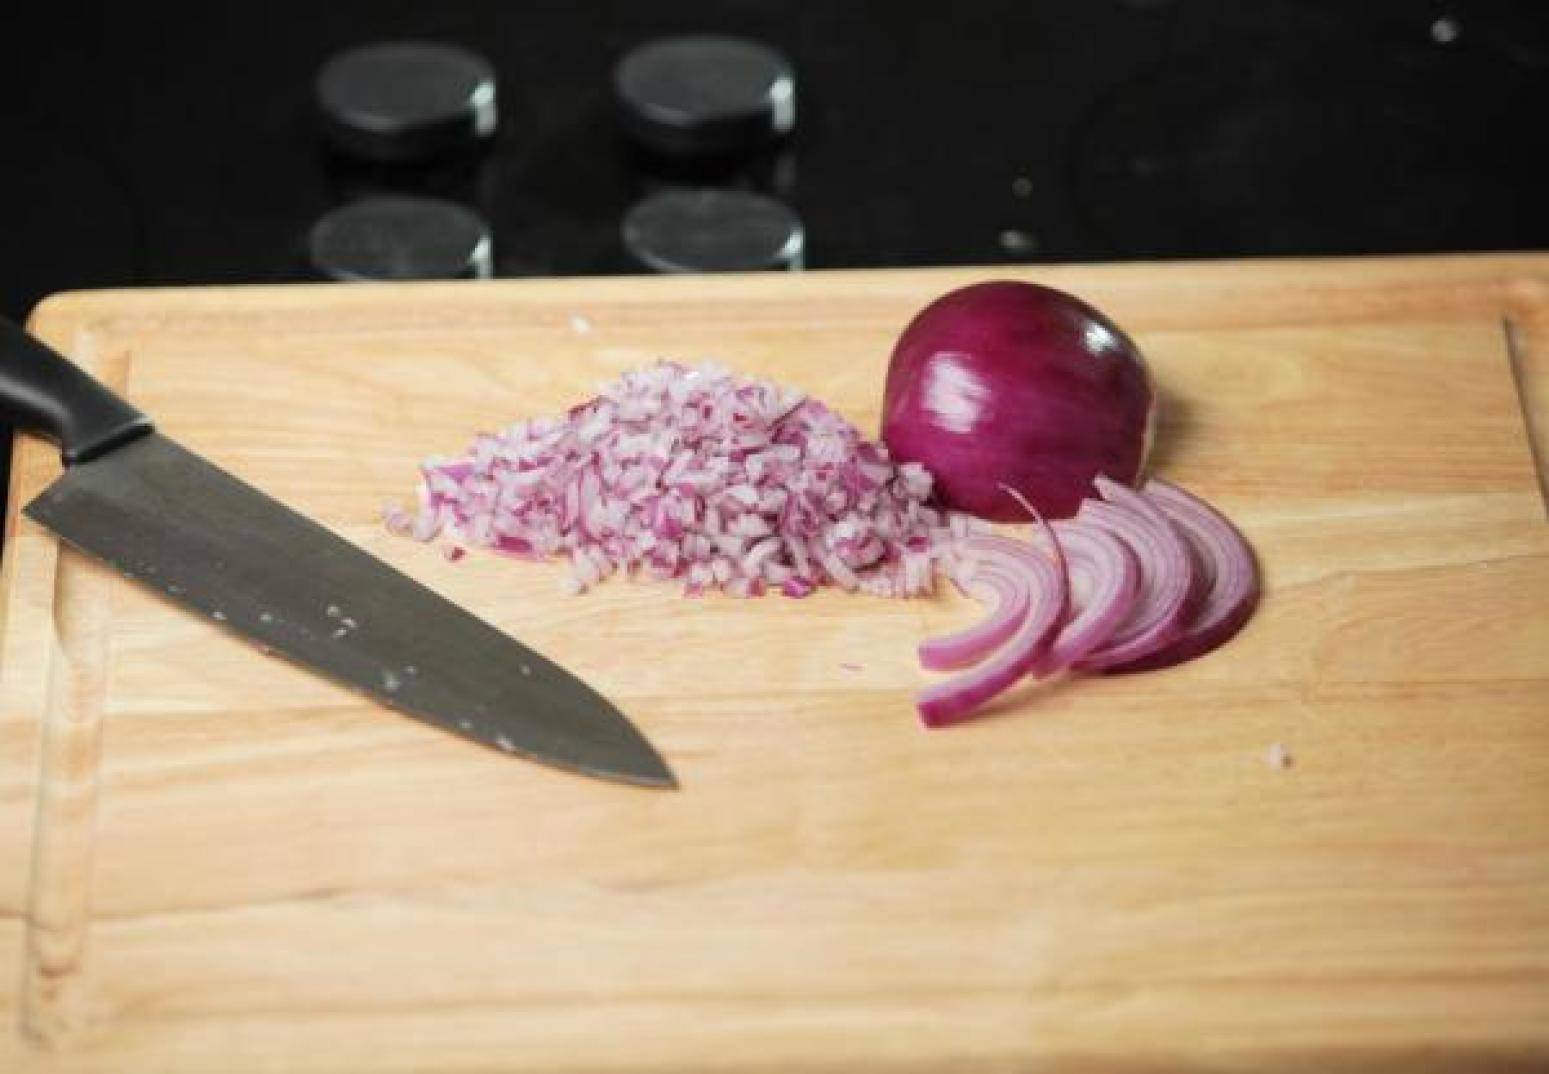 https://www.justapinch.com/blog/wp-content/uploads/2016/03/how-to-slice-and-mince-vegetables-like-a-pro.jpg